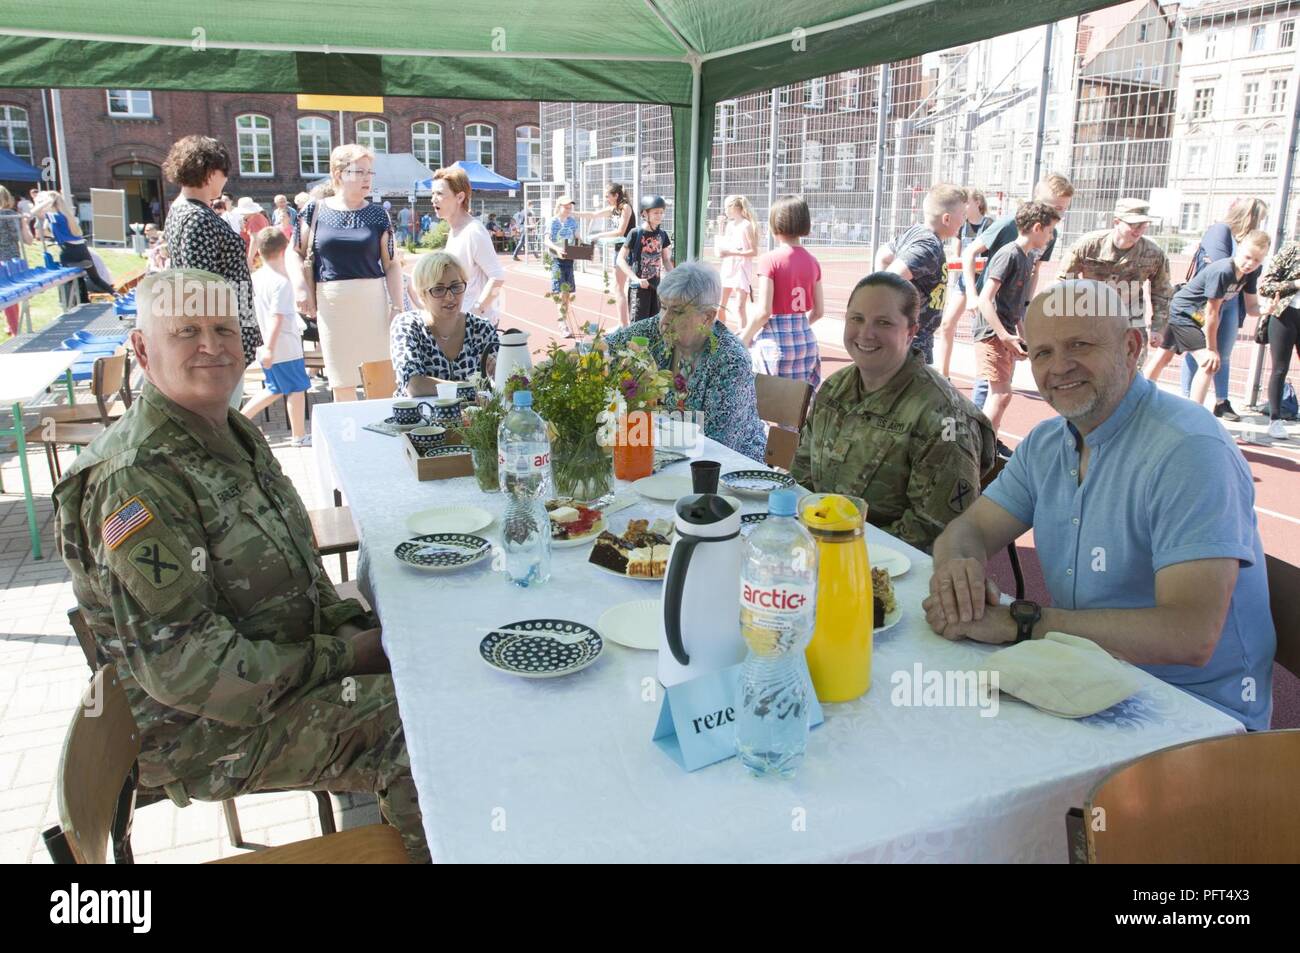 U.S. Army Sgt. Maj. Samuel Farley (right) and Maj. Emily Lynds (left), both assigned to Resolute Castle 18, 218th Maneuver Enhancement Brigade, South Carolina Army National Guard, have dessert with Kornel Filipowicz, the vice president of Boleslawiec, Poland, during the Boleslawiec Primary School Number 4 festival in Boleslawiec, Poland, May 26, 2018. Resolute Castle Soldiers were special guests of the festival and participated in sporting events and pottery painting with the primary school children. Stock Photo